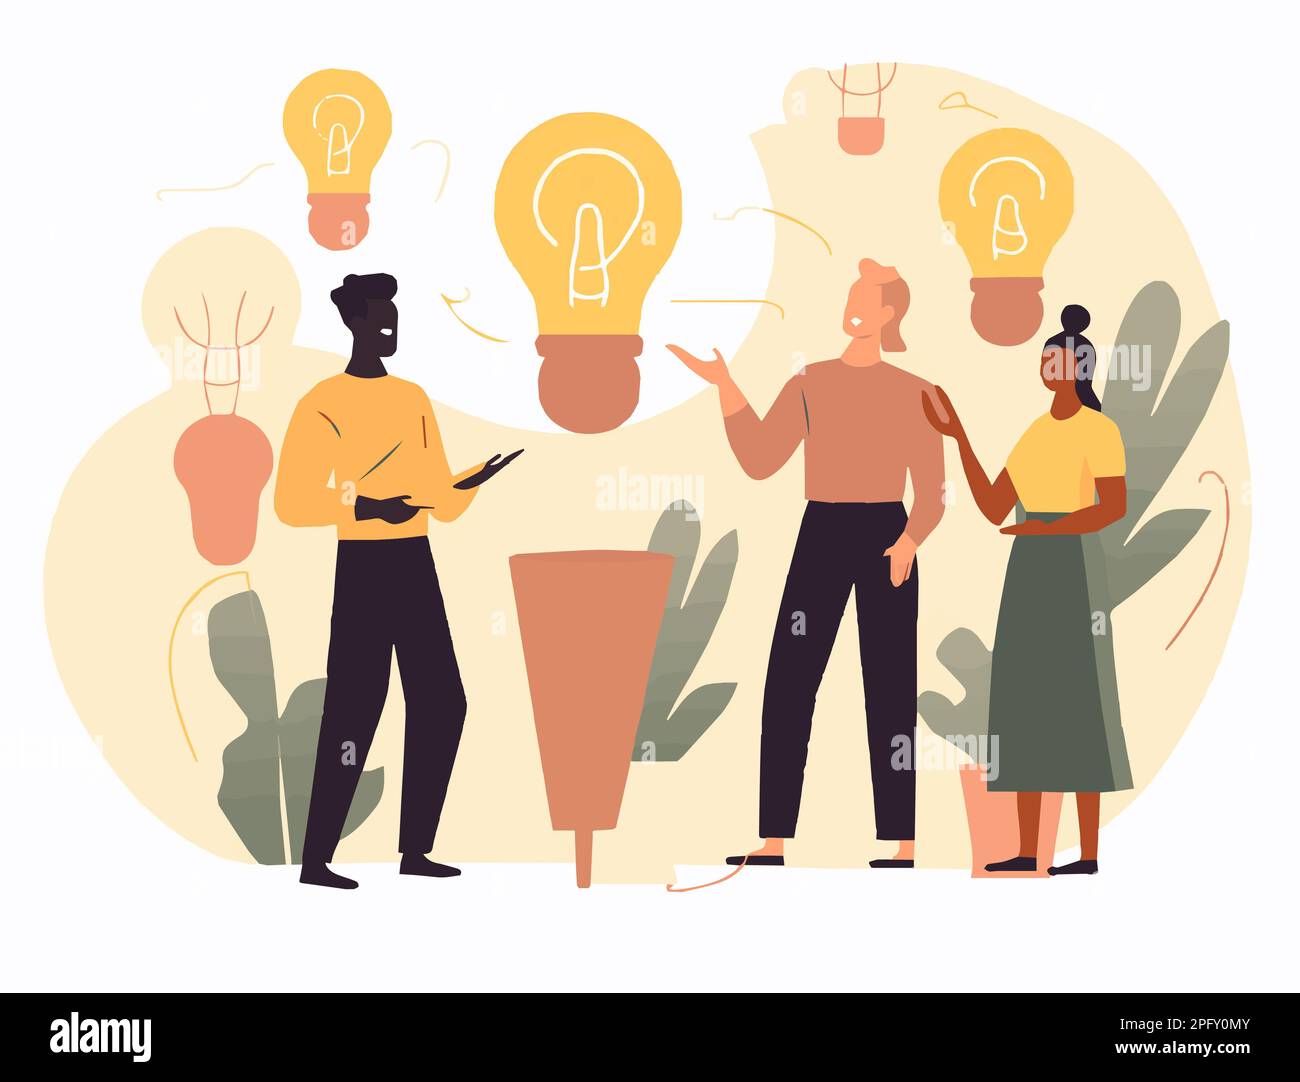 Diverse business team taking part in a brainstorming session, creative Idea generation vector illustration Stock Photo